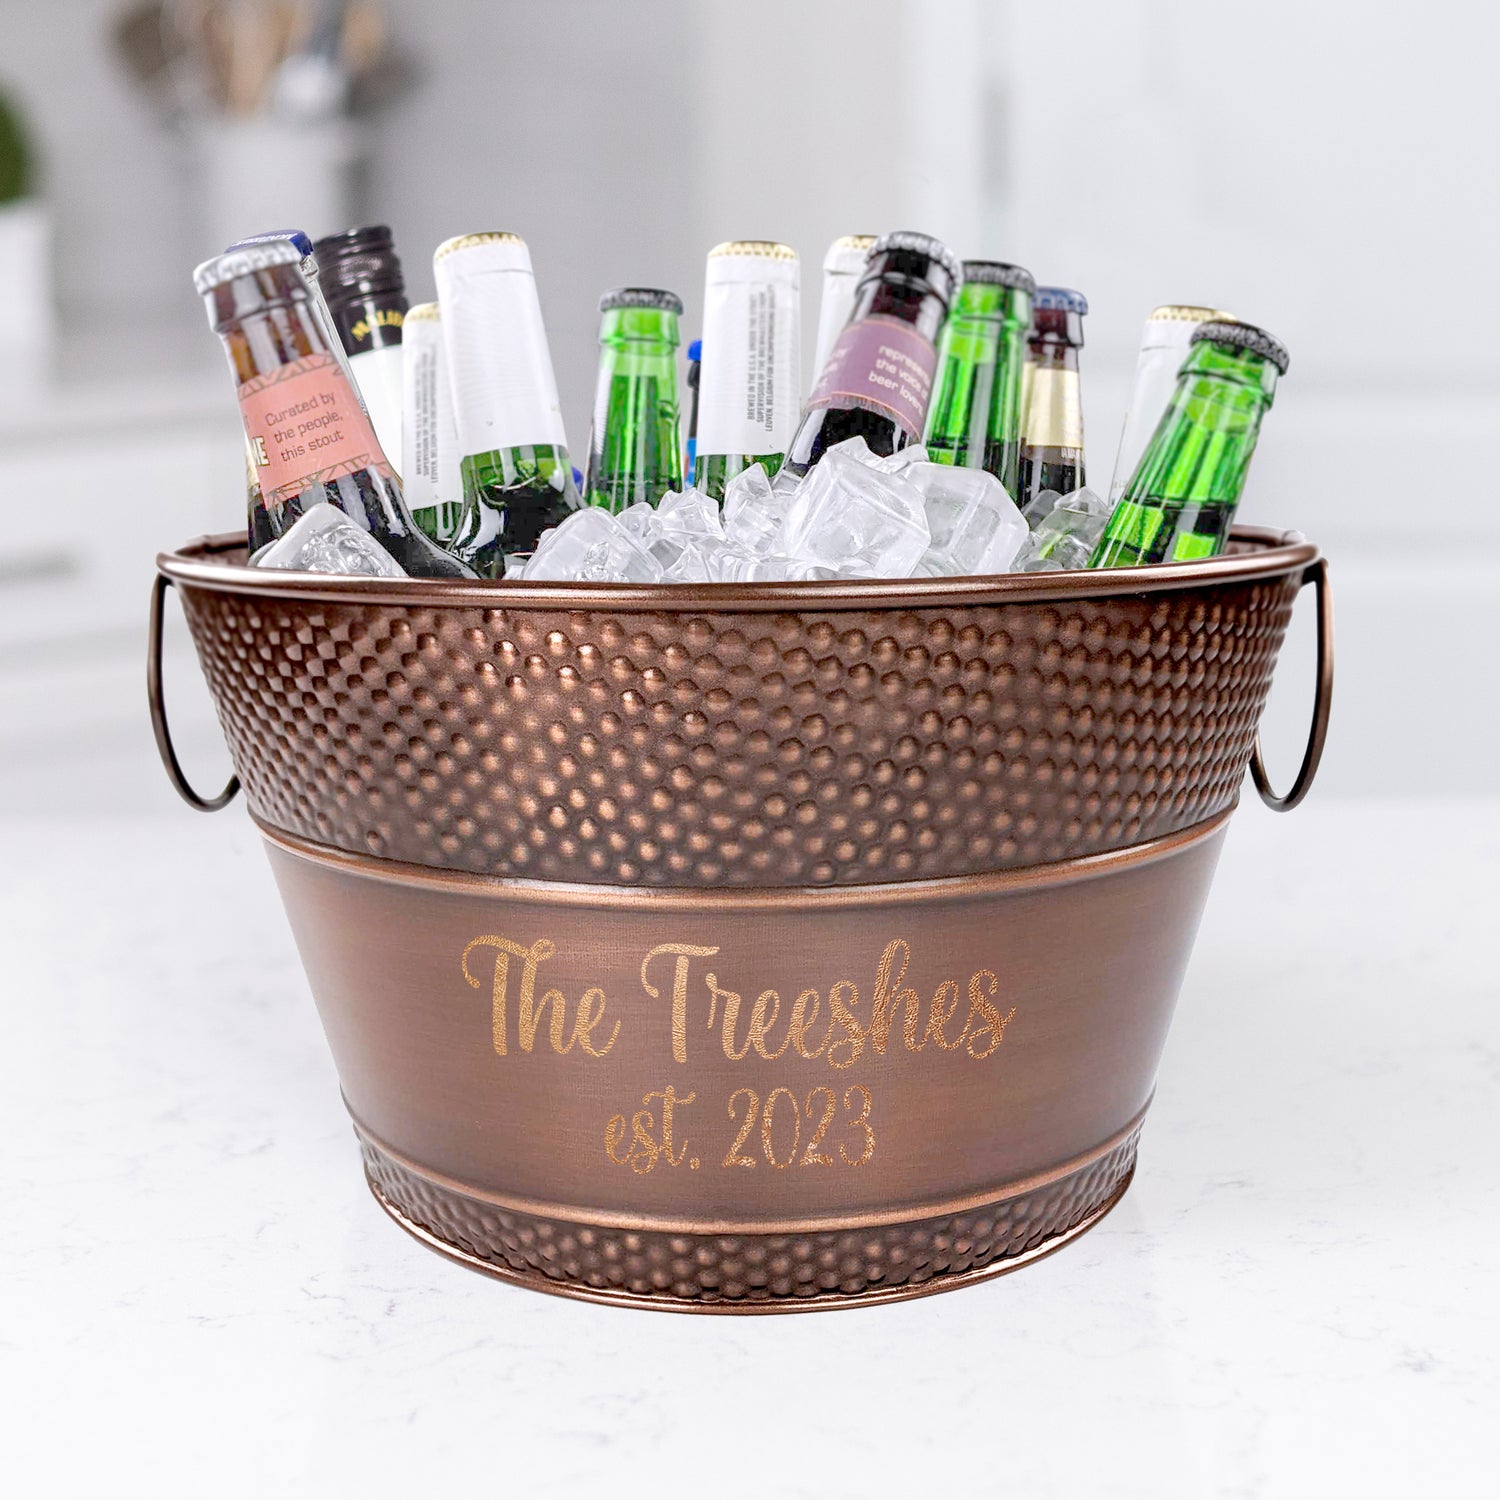 Promotional Insulated Beverage Cooler Tub W/ Stand